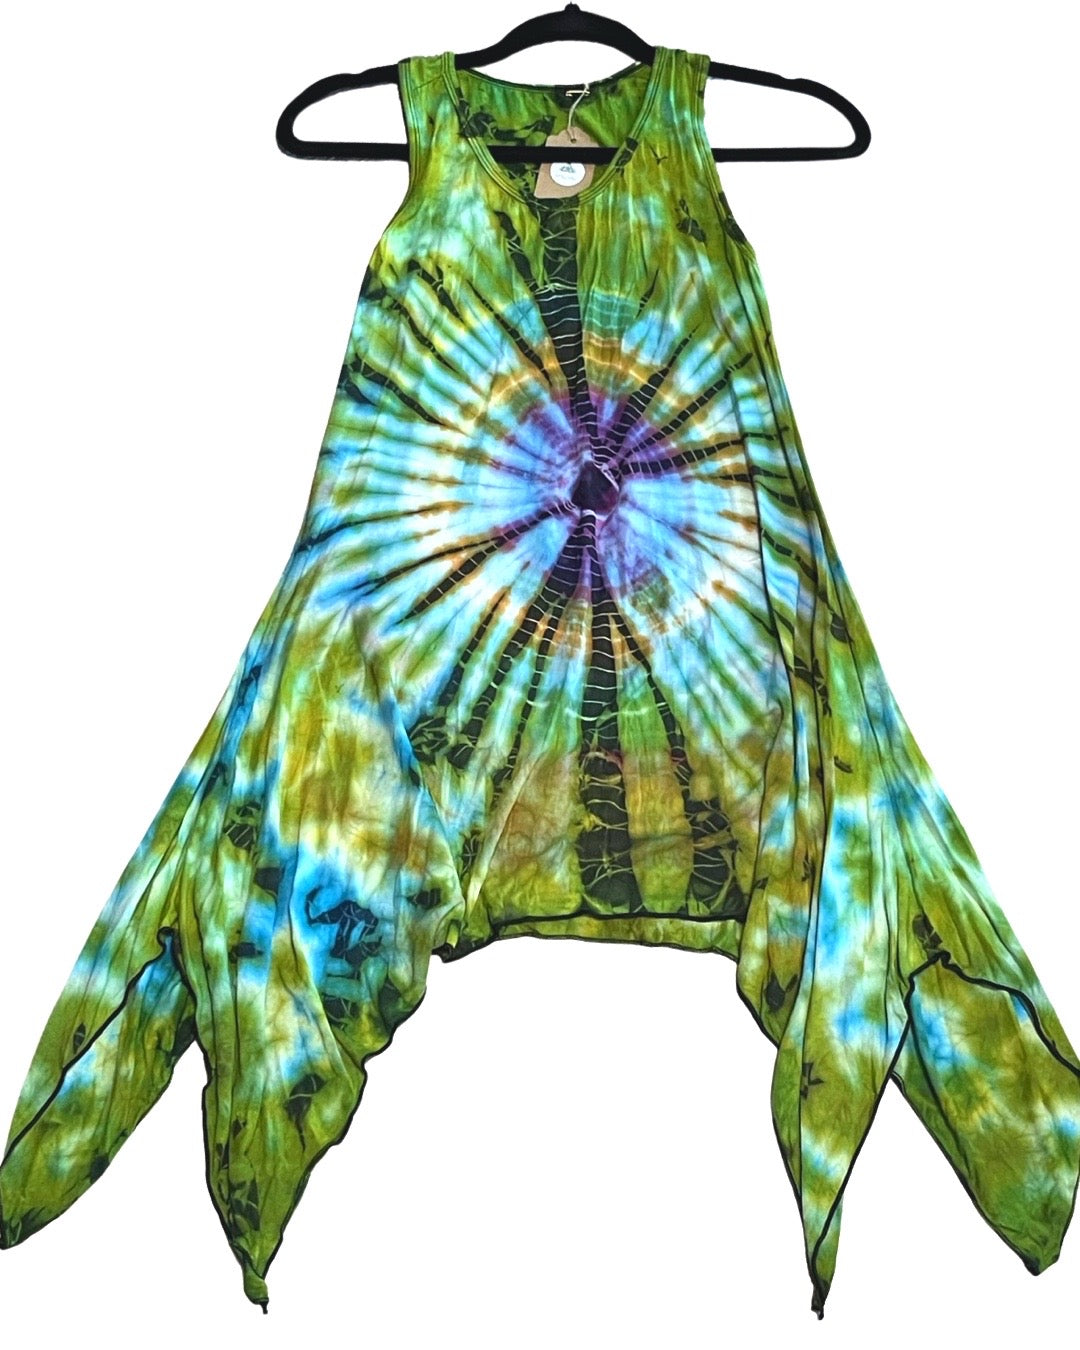 Tie Dye Yoga Tunic (multiple colors available)